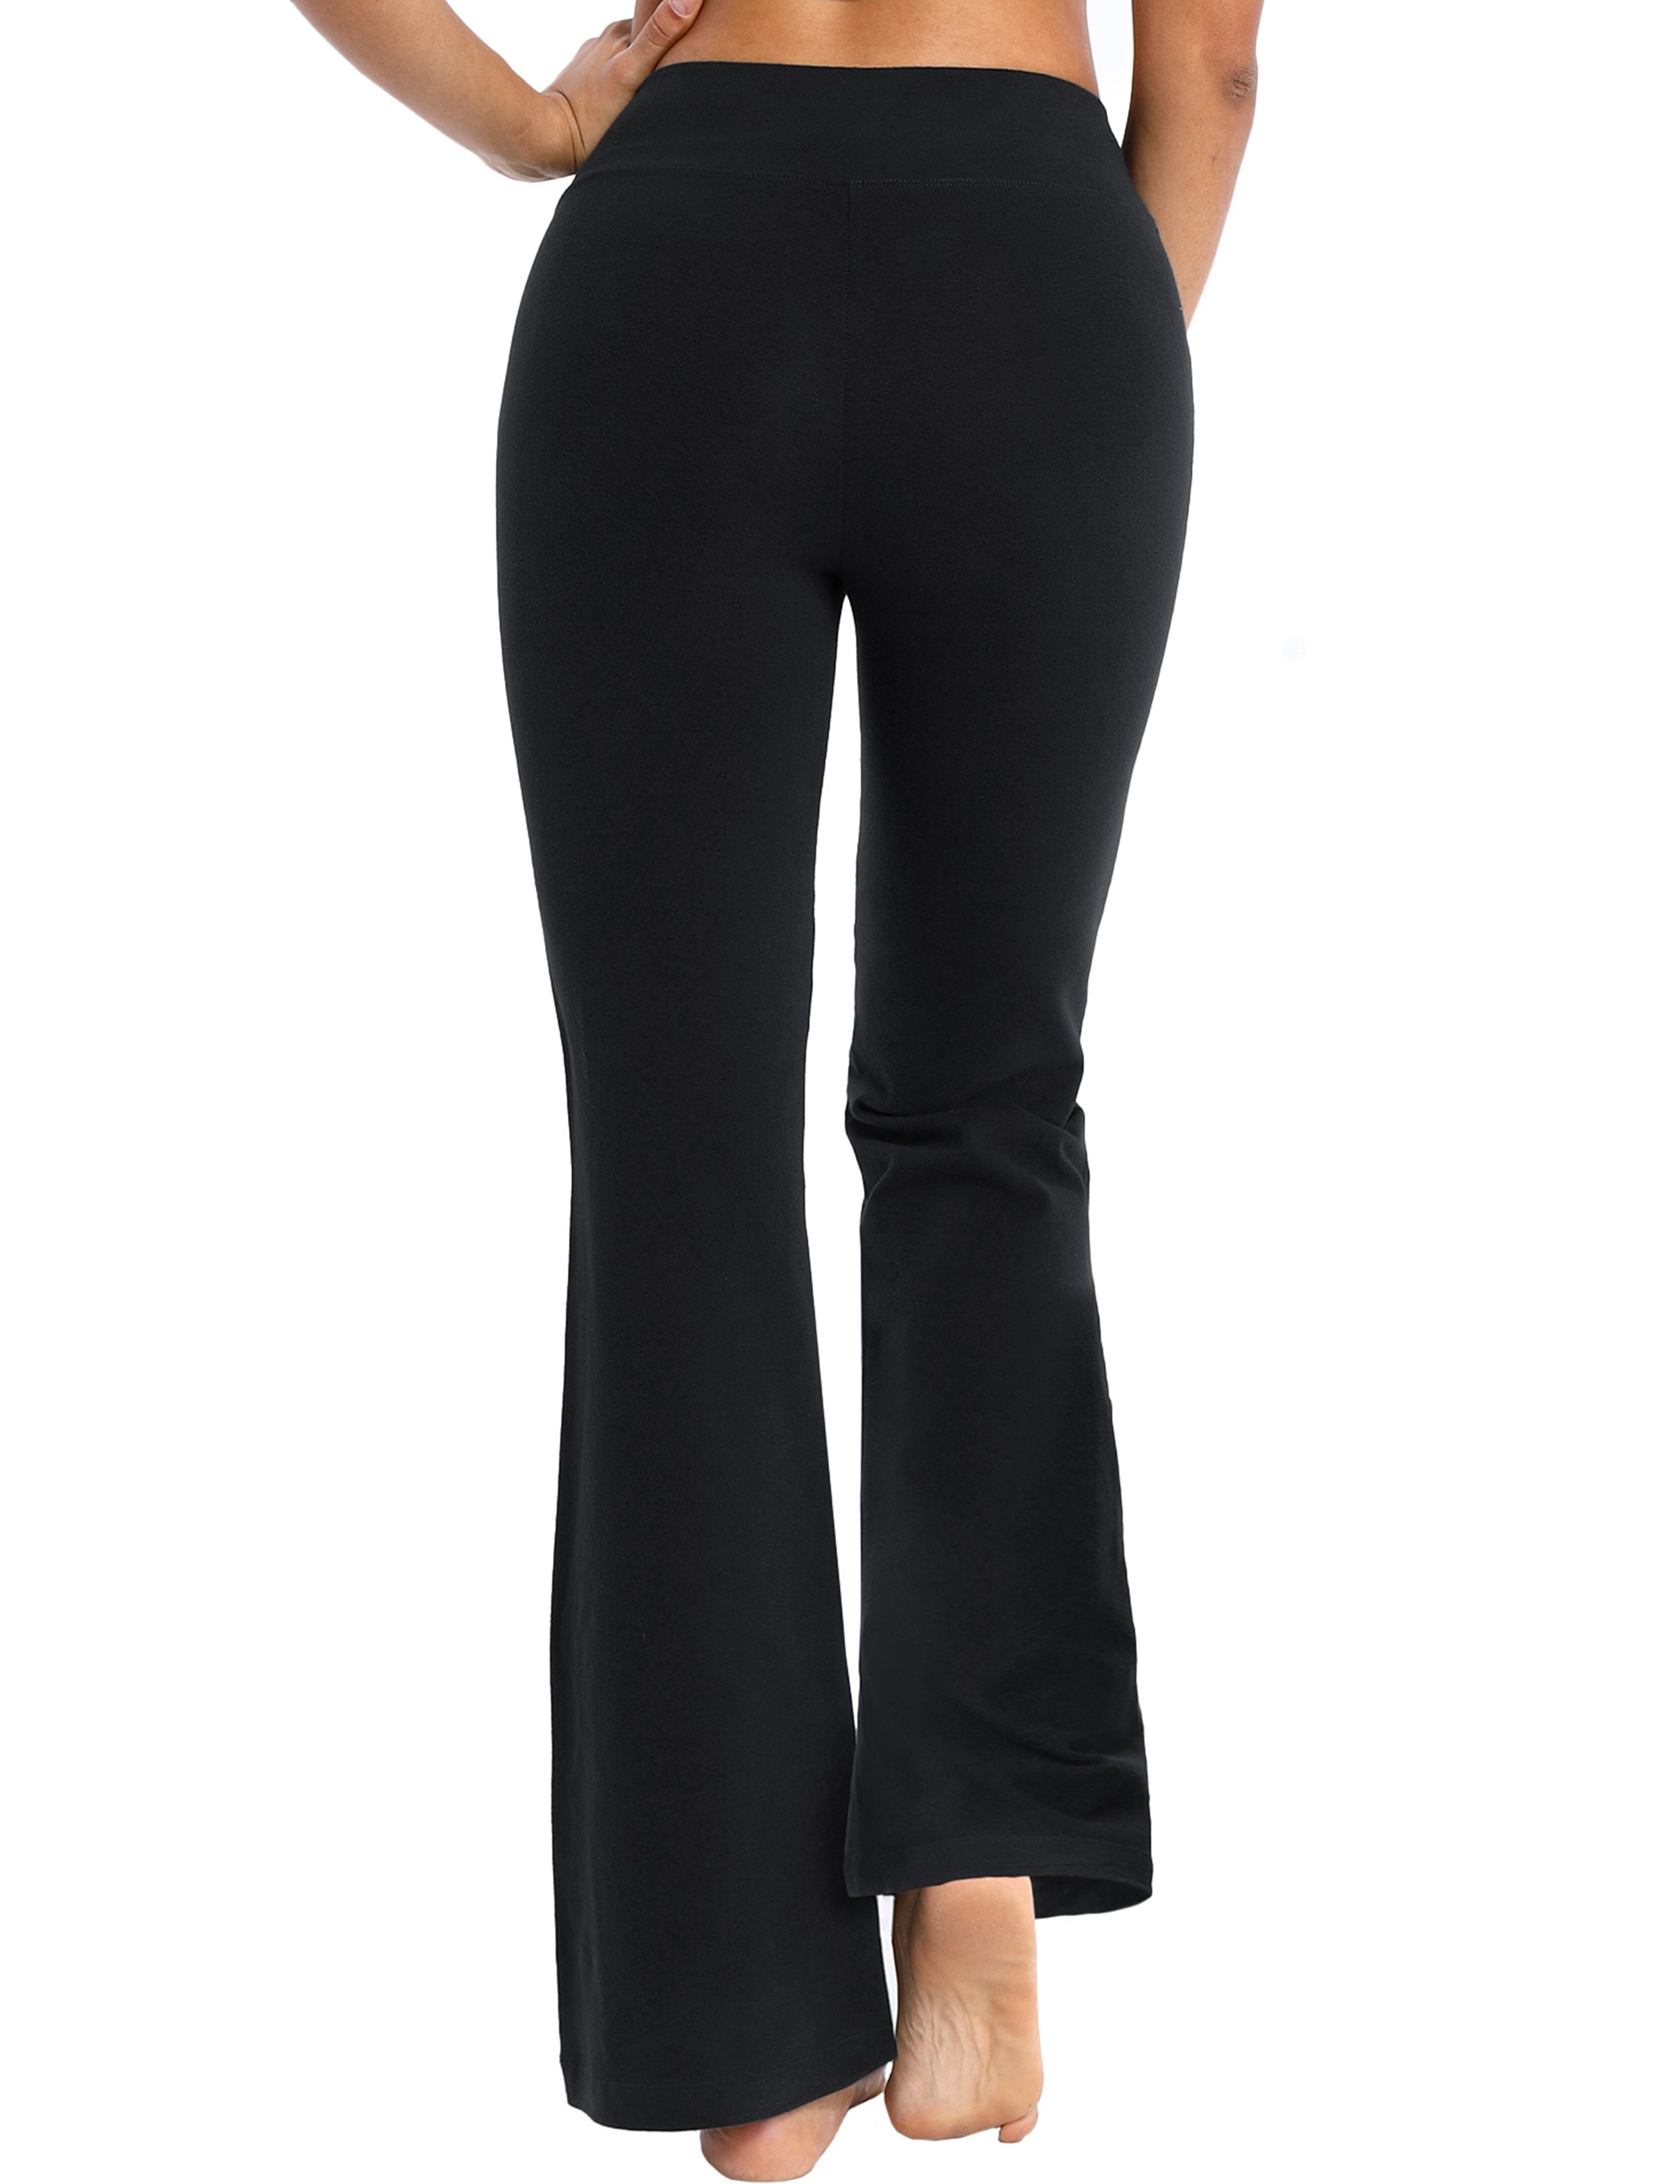 Cotton Bootcut Leggings black 90%Cotton/10%Spandex (soft and cotton feel) Fabric doesn't attract lint easily 4-way stretch No see-through Moisture-wicking Inner pocket Four lengths